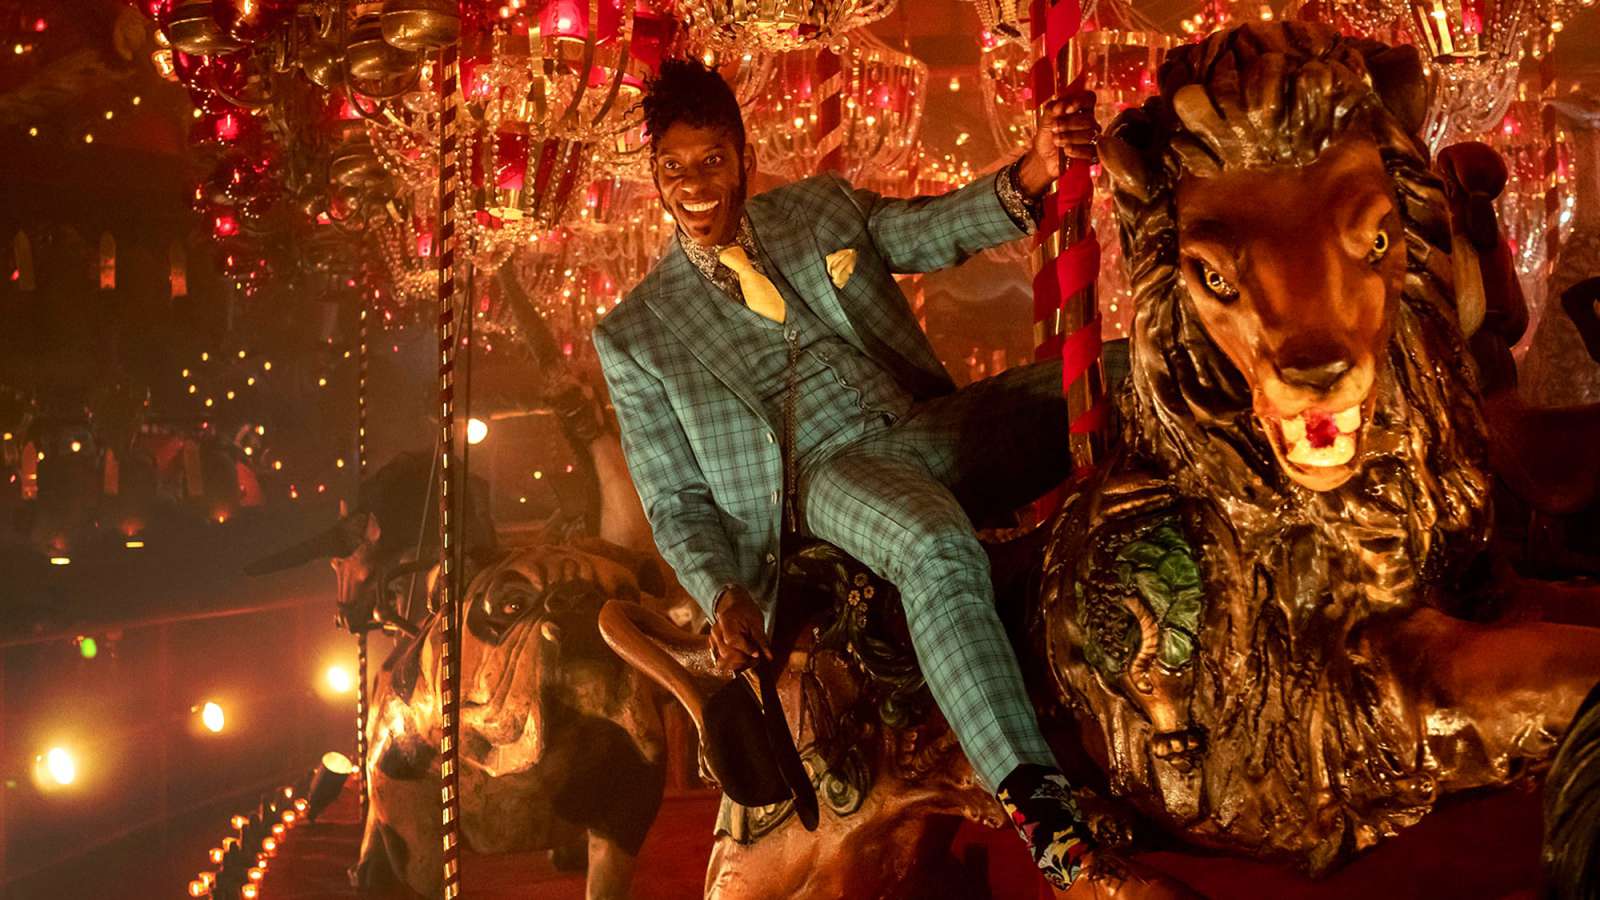 American Gods : The Ways of the Dead